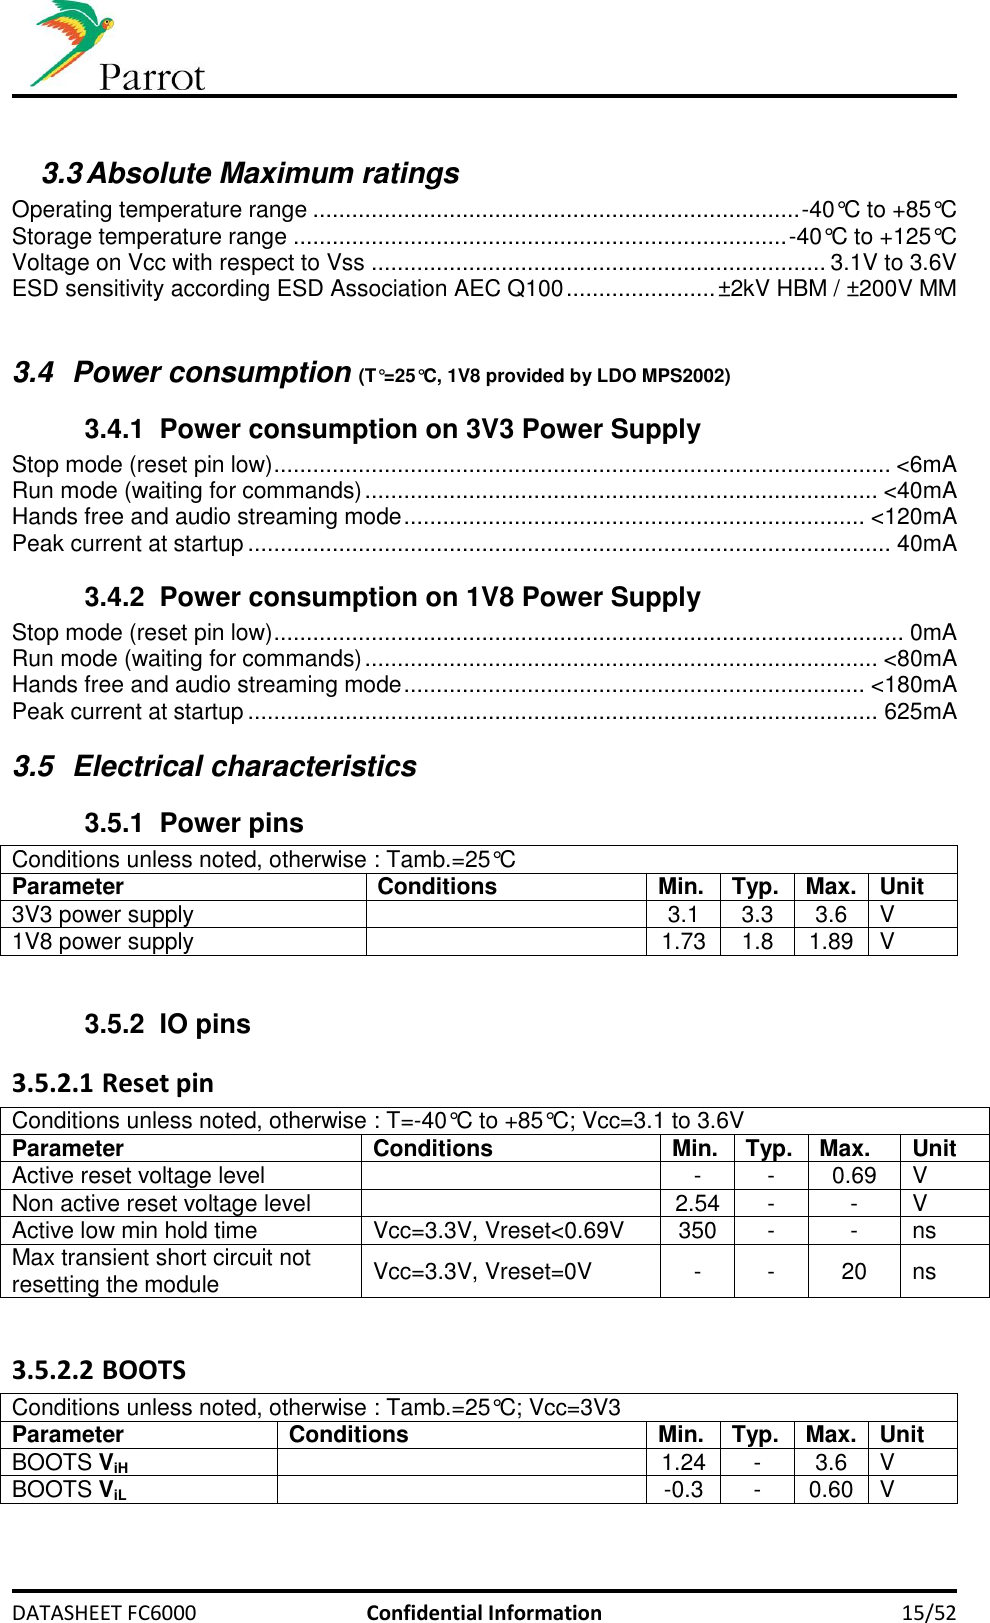     DATASHEET FC6000  Confidential Information 15/52  3.3 Absolute Maximum ratings  Operating temperature range ........................................................................... -40°C to +85°C Storage temperature range ............................................................................ -40°C to +125°C Voltage on Vcc with respect to Vss ...................................................................... 3.1V to 3.6V ESD sensitivity according ESD Association AEC Q100 ....................... ±2kV HBM / ±200V MM  3.4  Power consumption (T°=25°C, 1V8 provided by LDO MPS2002) 3.4.1  Power consumption on 3V3 Power Supply Stop mode (reset pin low) ............................................................................................... &lt;6mA Run mode (waiting for commands) ............................................................................... &lt;40mA Hands free and audio streaming mode ....................................................................... &lt;120mA Peak current at startup ................................................................................................... 40mA 3.4.2  Power consumption on 1V8 Power Supply Stop mode (reset pin low) ................................................................................................. 0mA Run mode (waiting for commands) ............................................................................... &lt;80mA Hands free and audio streaming mode ....................................................................... &lt;180mA Peak current at startup ................................................................................................. 625mA 3.5  Electrical characteristics 3.5.1  Power pins Conditions unless noted, otherwise : Tamb.=25°C Parameter Conditions Min. Typ. Max. Unit 3V3 power supply  3.1 3.3 3.6 V 1V8 power supply  1.73 1.8 1.89 V  3.5.2 IO pins 3.5.2.1 Reset pin Conditions unless noted, otherwise : T=-40°C to +85°C; Vcc=3.1 to 3.6V Parameter Conditions Min. Typ. Max. Unit Active reset voltage level  - - 0.69 V Non active reset voltage level  2.54 - - V Active low min hold time Vcc=3.3V, Vreset&lt;0.69V 350 - - ns Max transient short circuit not resetting the module Vcc=3.3V, Vreset=0V - - 20 ns  3.5.2.2 BOOTS Conditions unless noted, otherwise : Tamb.=25°C; Vcc=3V3 Parameter Conditions Min. Typ. Max. Unit BOOTS ViH  1.24 - 3.6 V BOOTS ViL  -0.3 - 0.60 V  